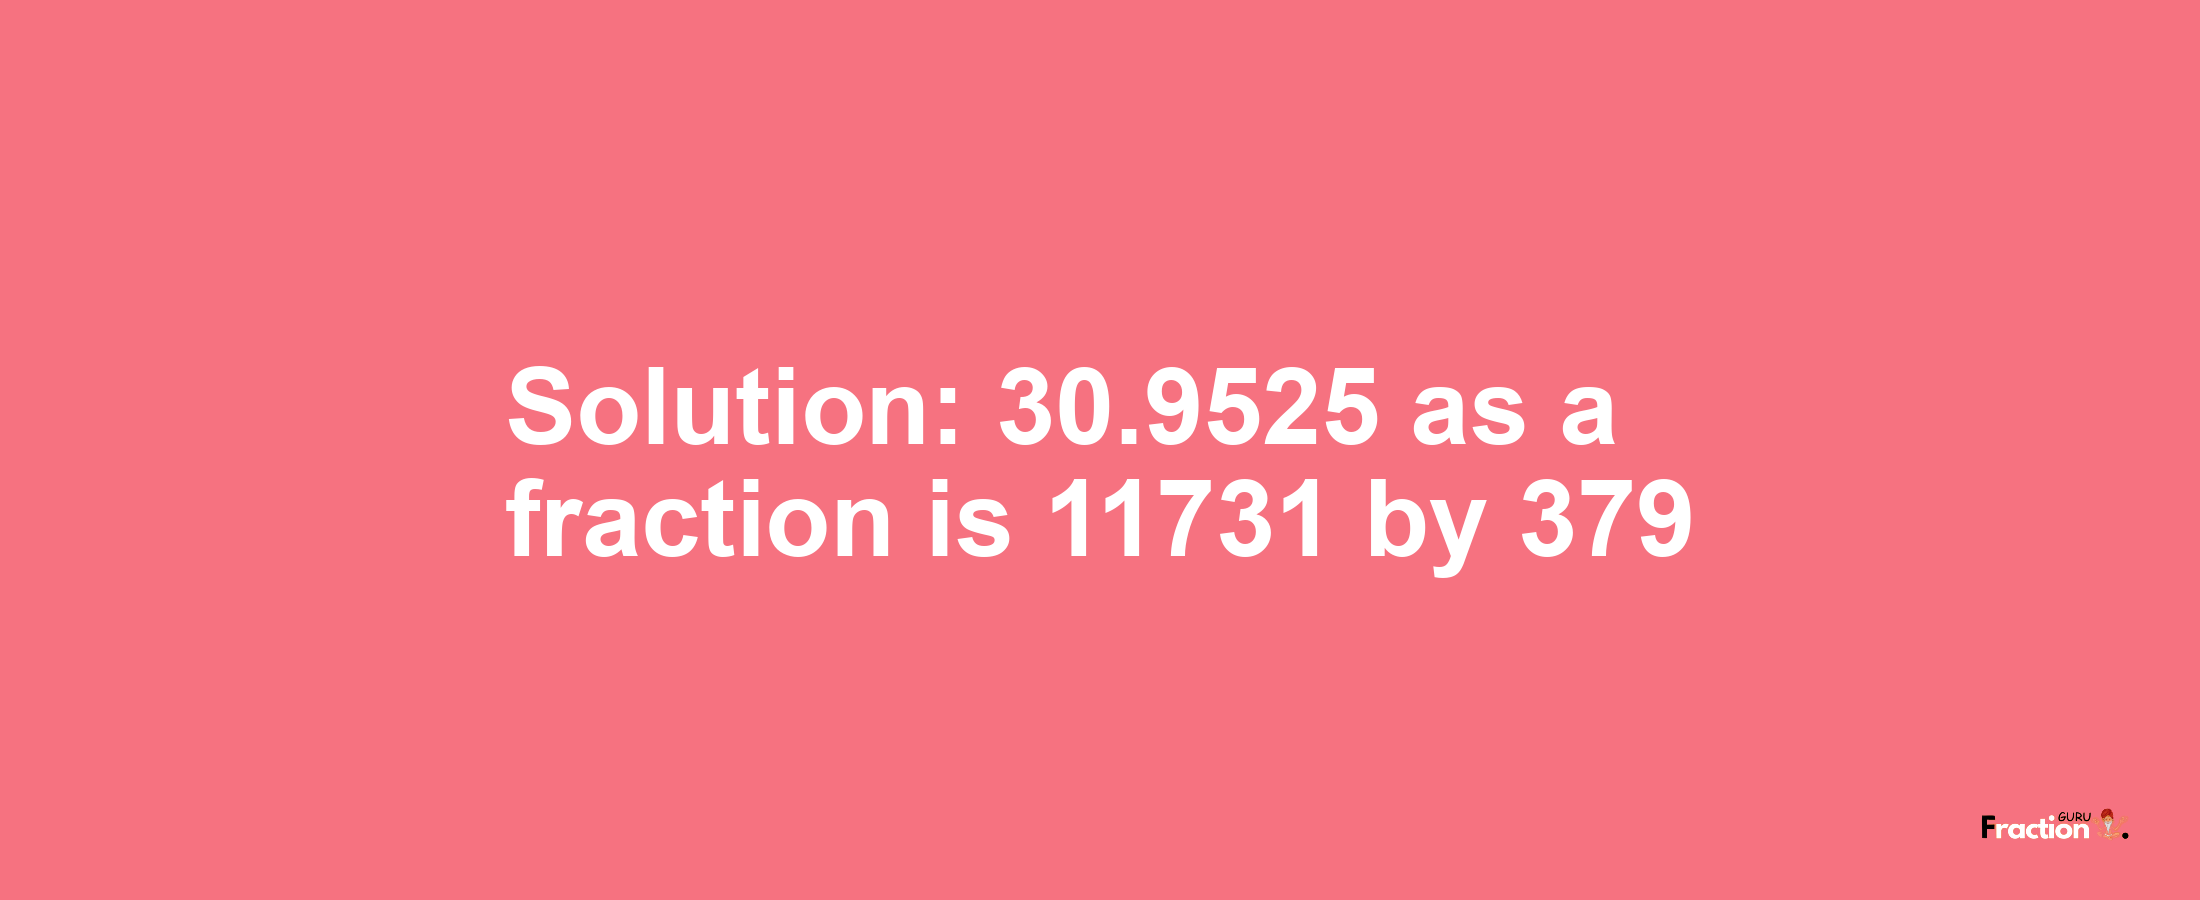 Solution:30.9525 as a fraction is 11731/379